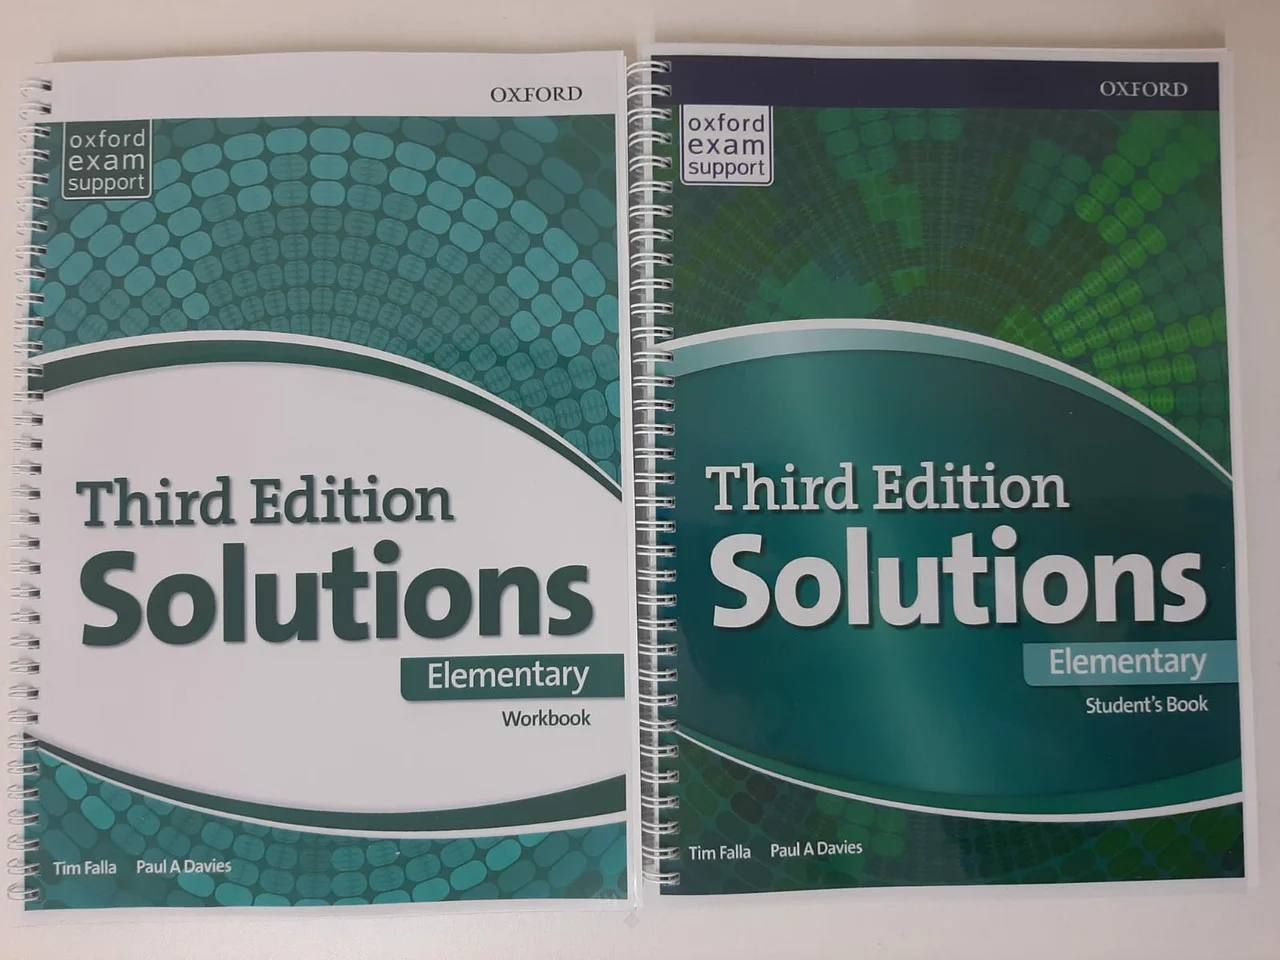 Solutions 3 edition elementary books. Solutions Elementary 3rd Edition. Solutions third Edition Elementary Tests. Solutions Elementary Green 3rd Edition exsom 3. Solutions Elementary 3rd Edition Tests 3.